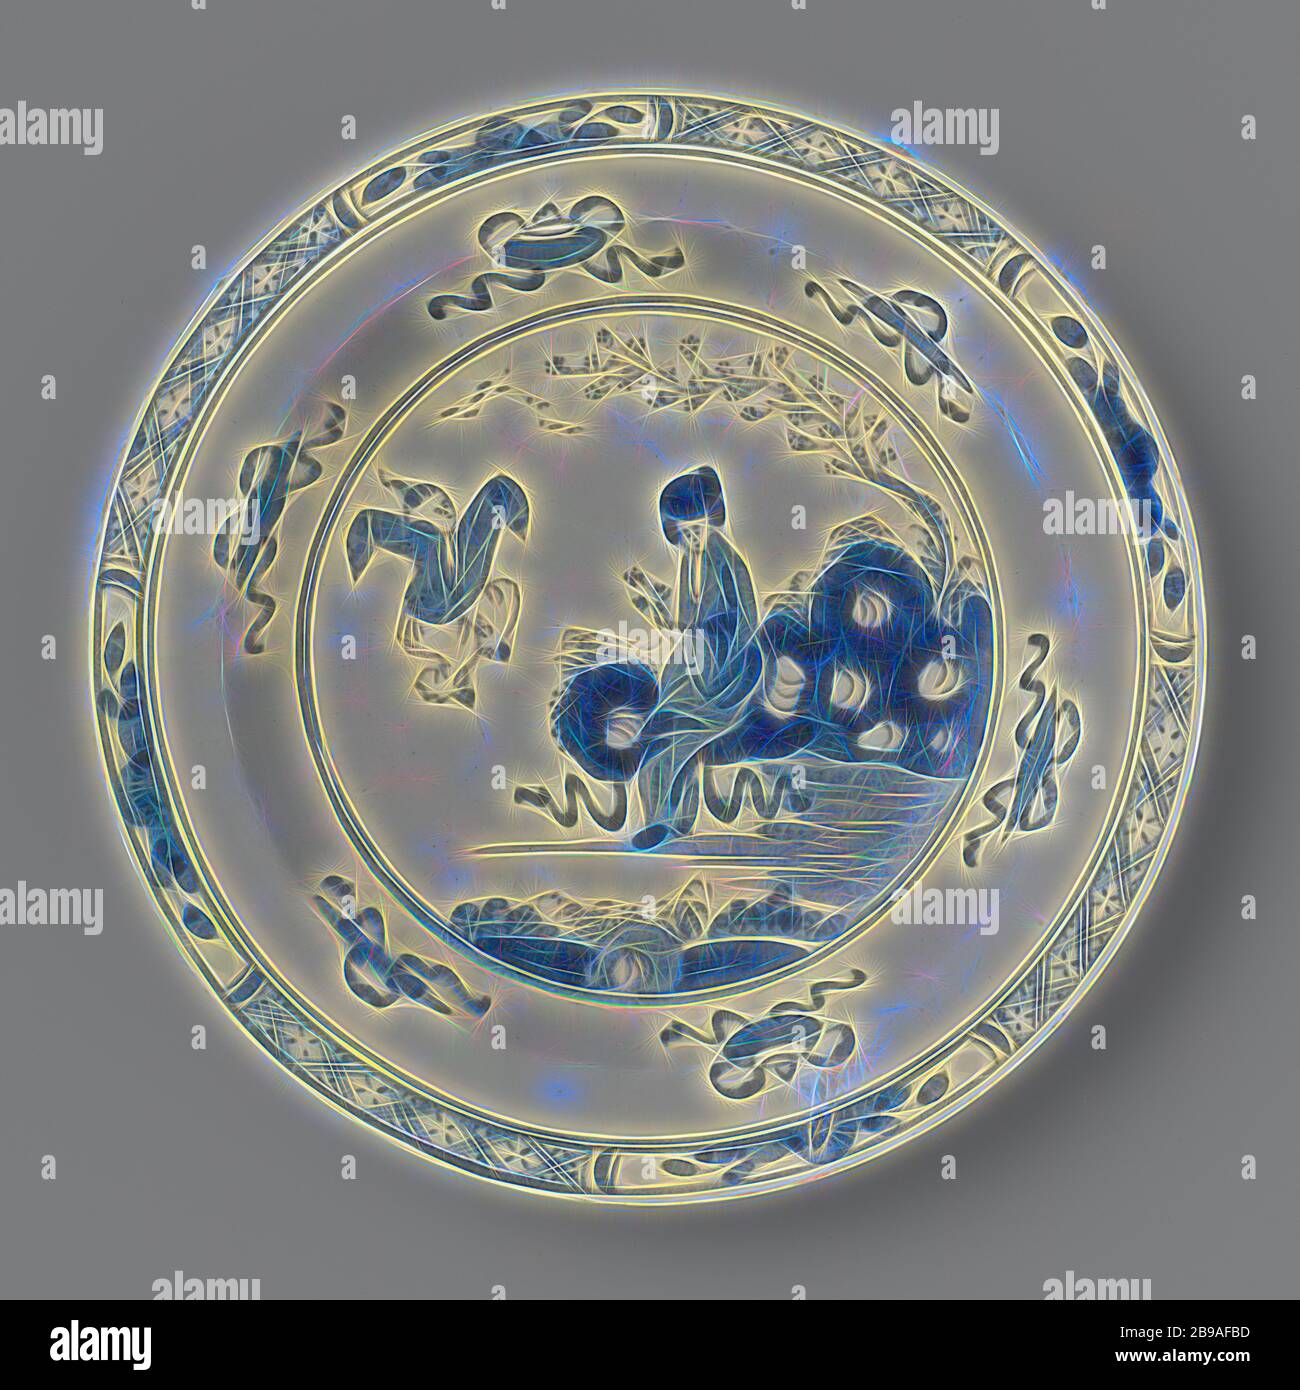 Dish with decoration in blue, Dish of soft paste porcelain, with decoration in blue on white ground: geometrically decorated border, between which borders with leaves. Inside a border with Chinese emblems, in the flat, within a double circle, a Chinese landscape with a woman and a 'fool'. Three grass blades on the outside., anonymous, Bow, c. 1750 - c. 1800, soft-paste porcelain, h 2.5 cm × d 16.5 cm, Reimagined by Gibon, design of warm cheerful glowing of brightness and light rays radiance. Classic art reinvented with a modern twist. Photography inspired by futurism, embracing dynamic energy Stock Photo